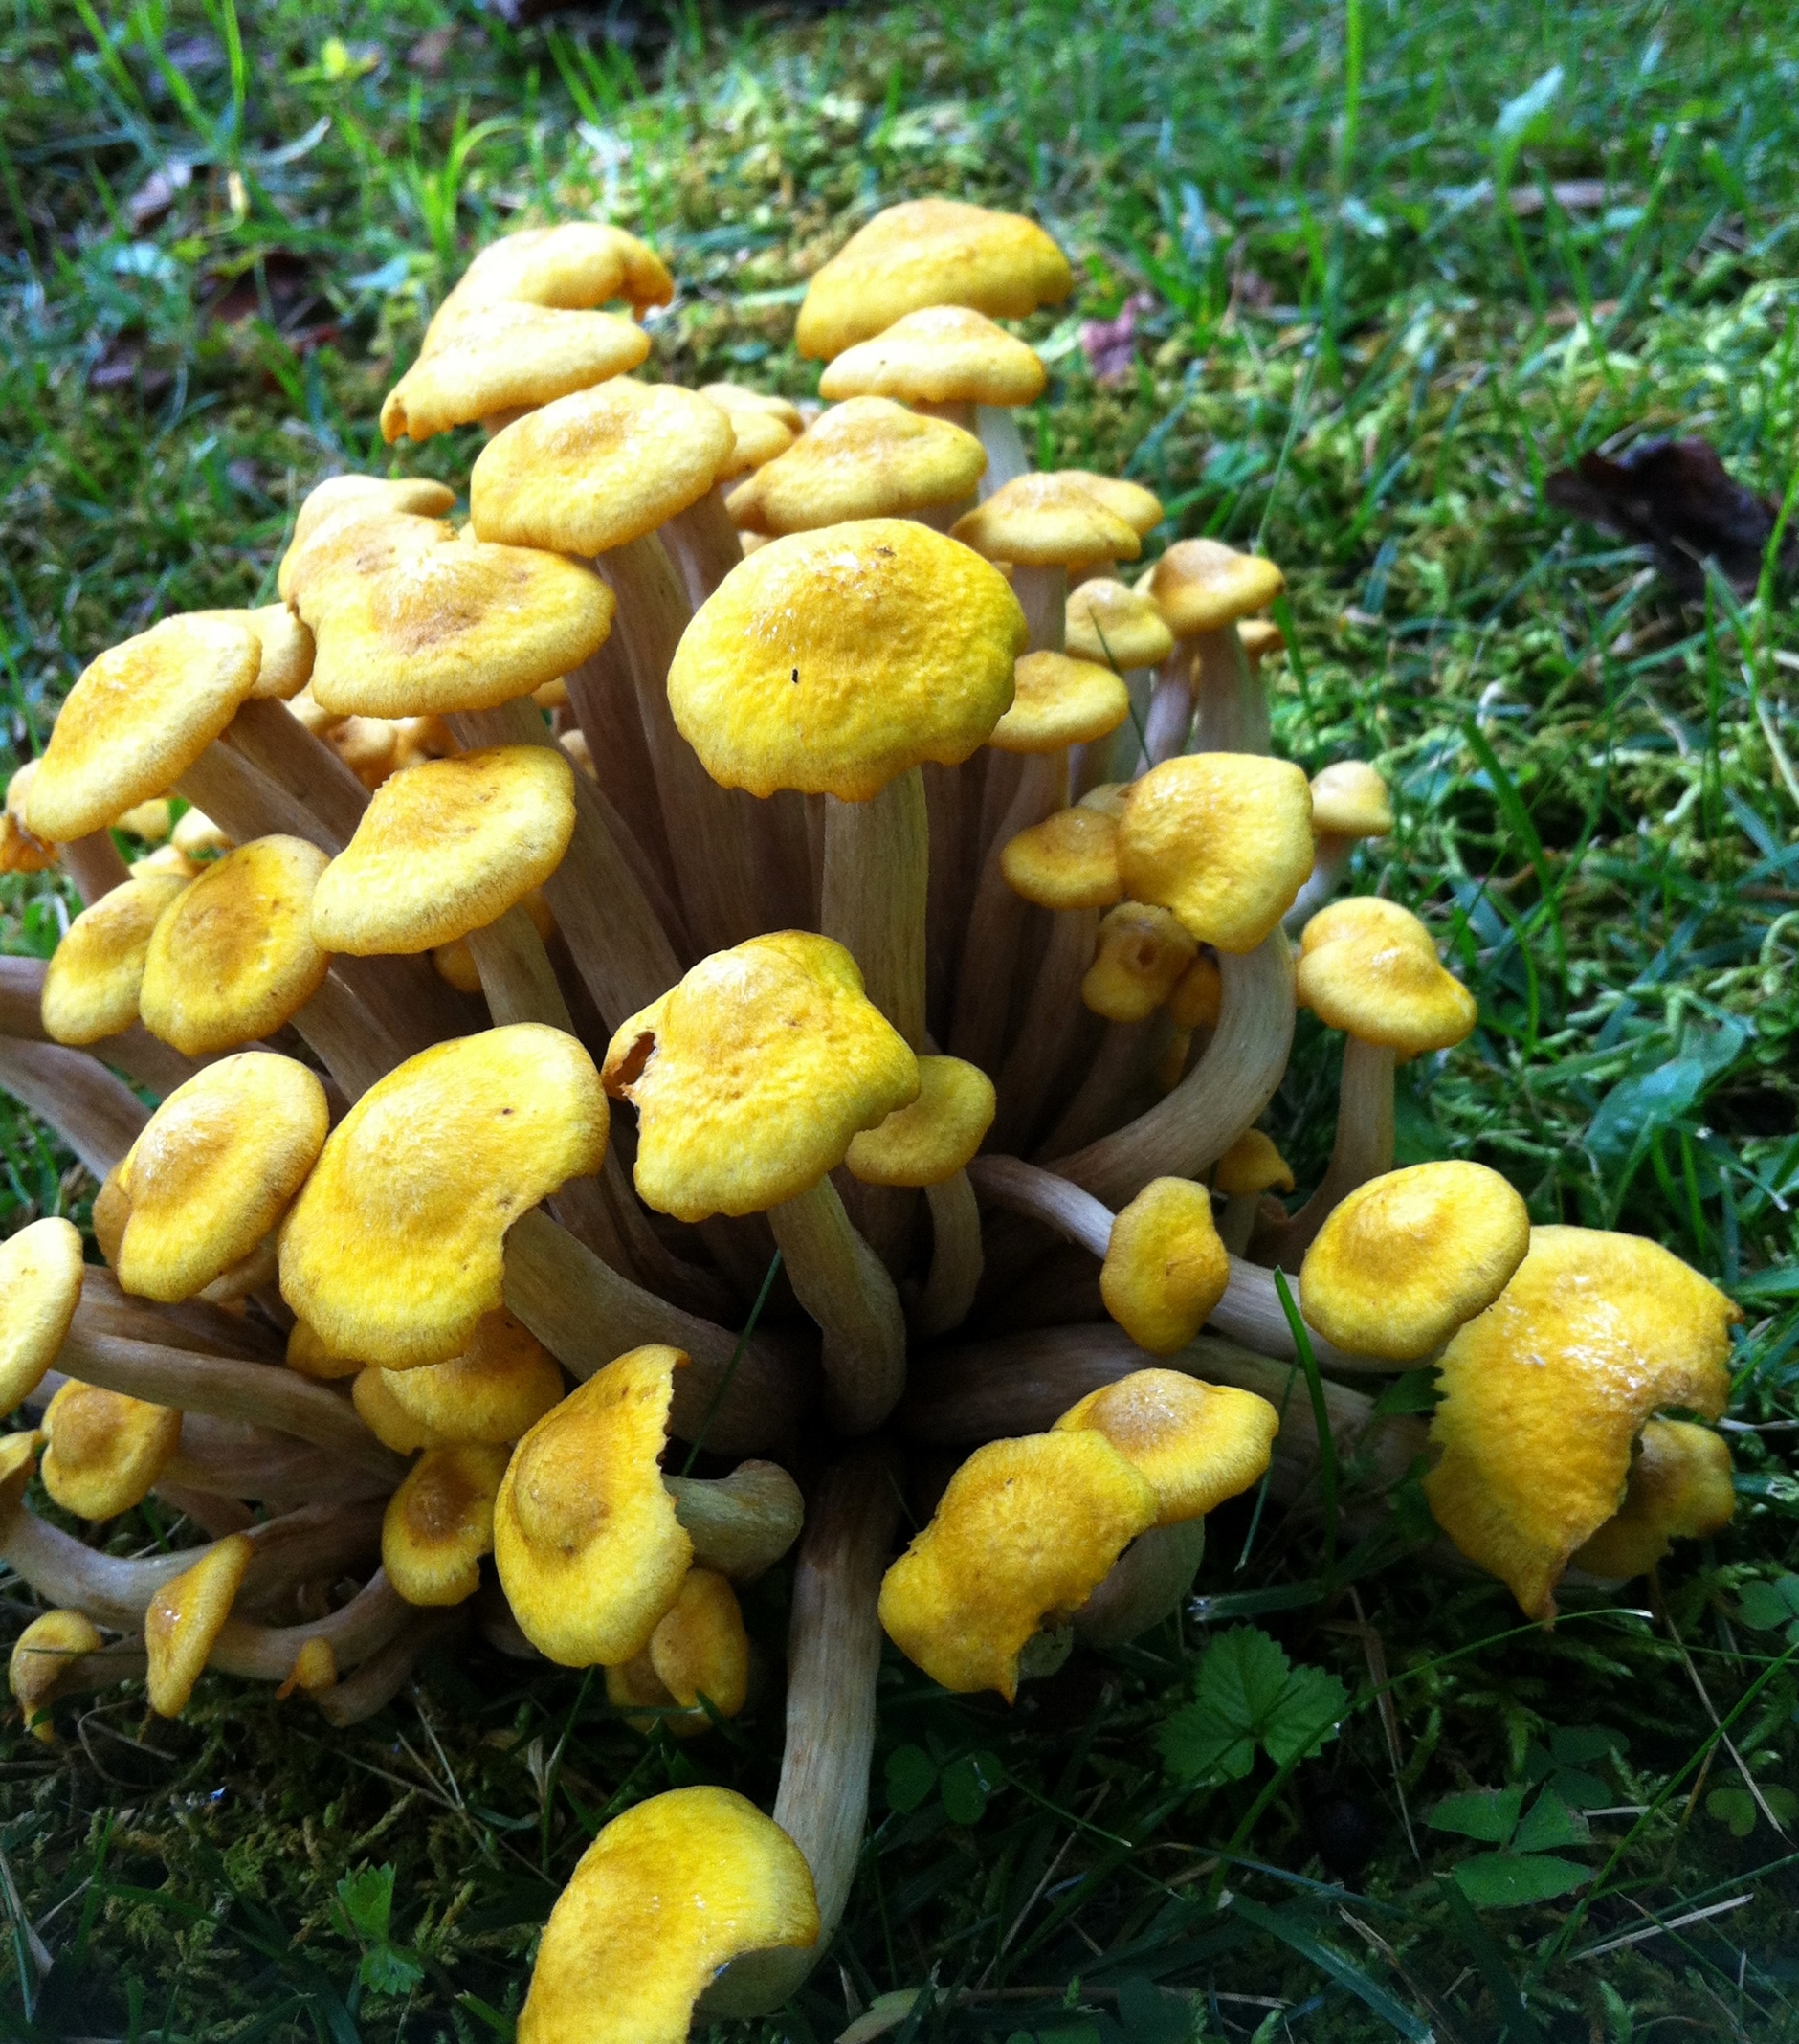 Strange and beautiful mushrooms from my backyard | Delicious Potager